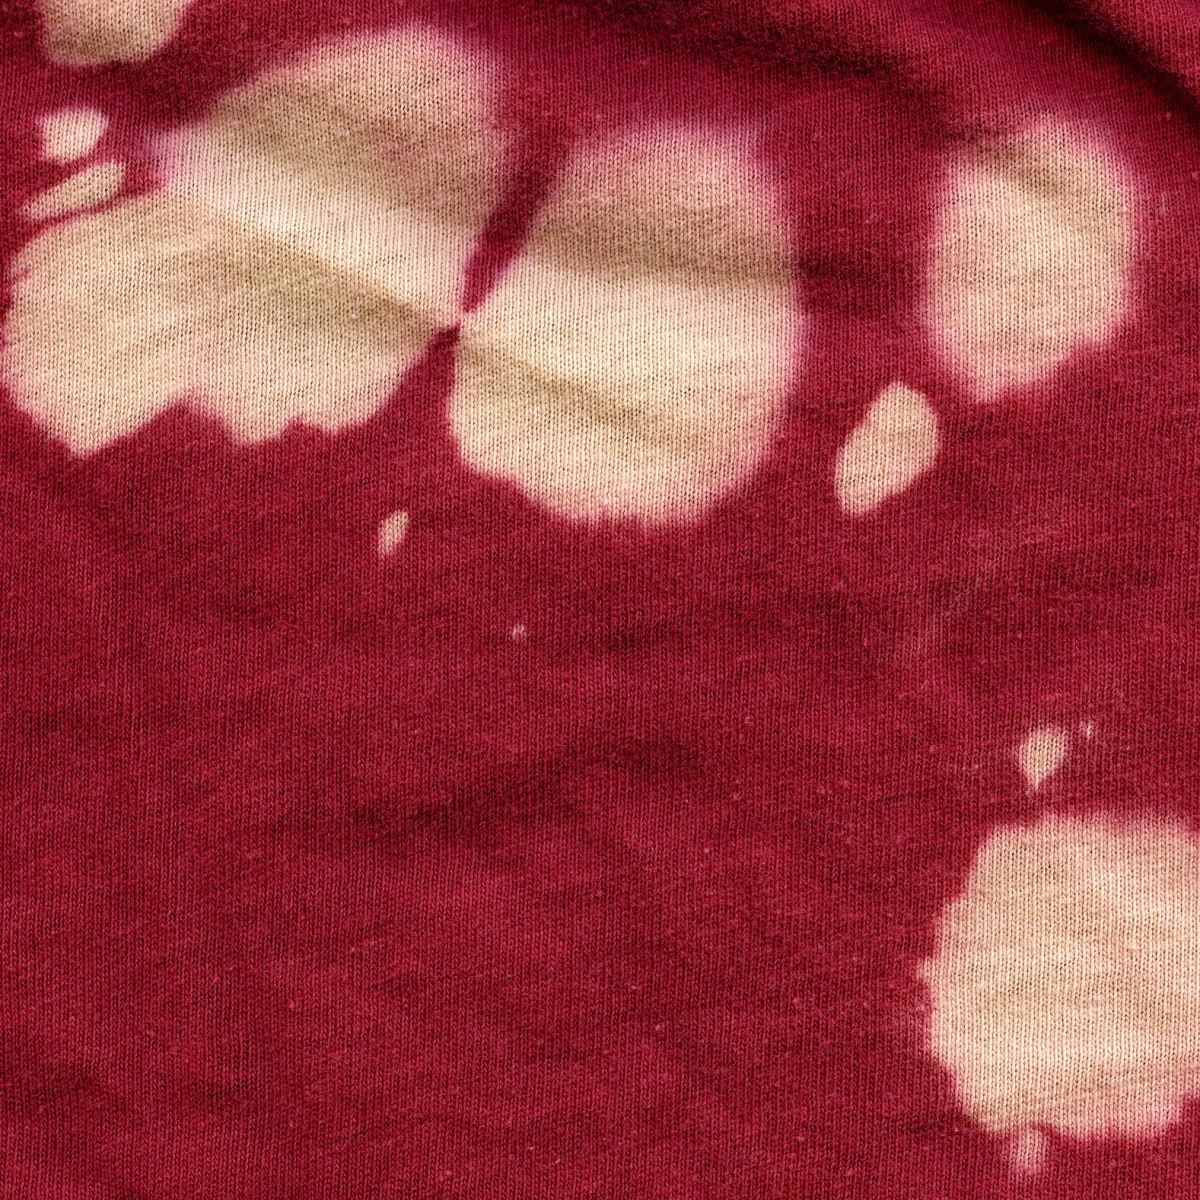 Preventing Bleach Stains on Clothing